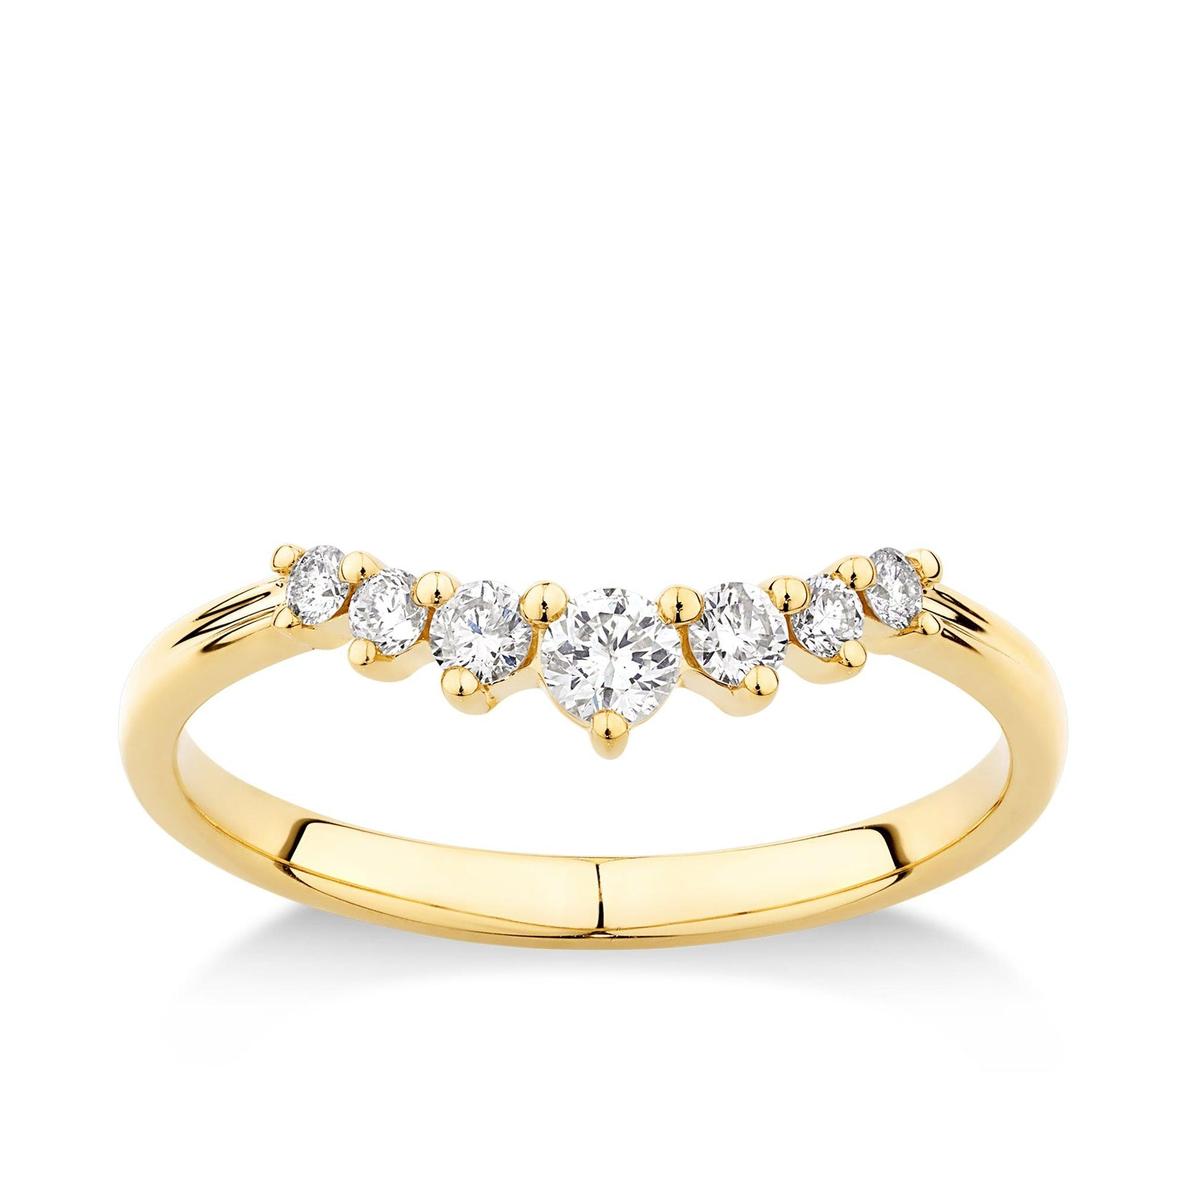 0.25ct TW Diamond Dress Wedding Ring 9ct Yellow Gold offers in Wallace Bishop